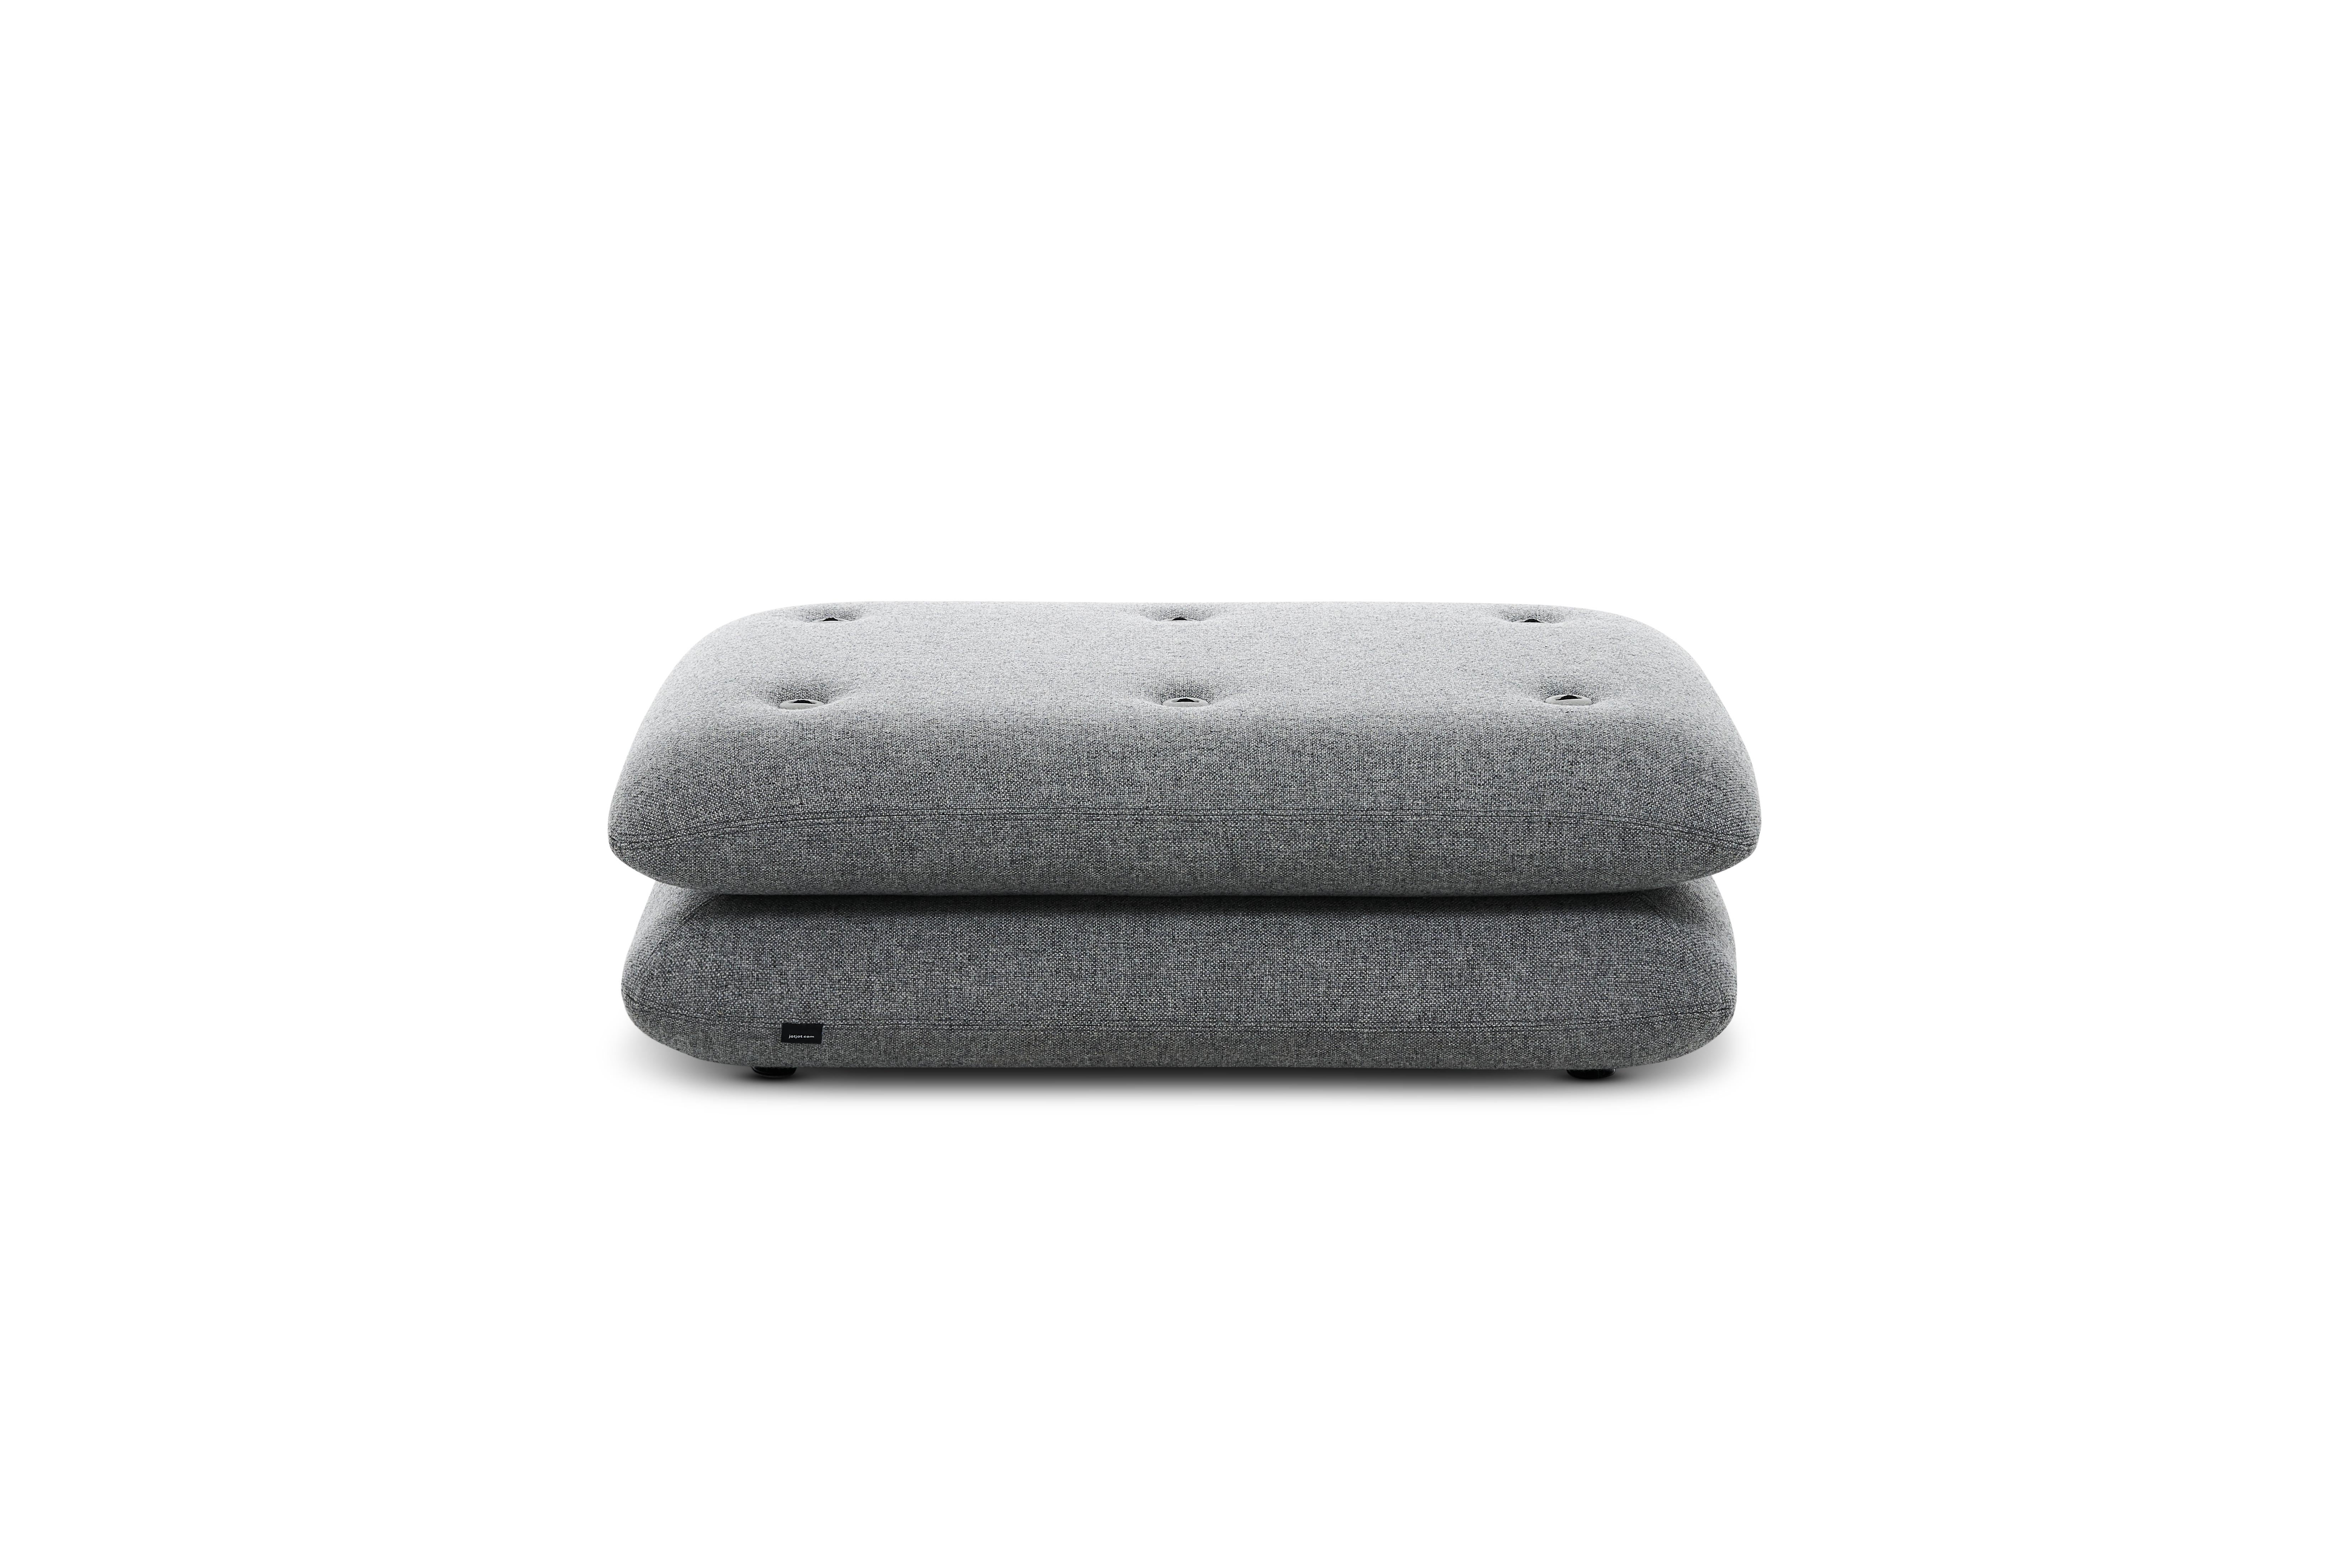 Sand bag like cushions made of upholstered foam. Bricklaying design fixed up with tailor quality buttons made of fiber concrete and tied up with rope. 

Upholstery :
Kvadrat Hallingdal 65 - 110
Kvadrat Hallingdal 65 - 130
Kvadrat Hallingdal 65 -